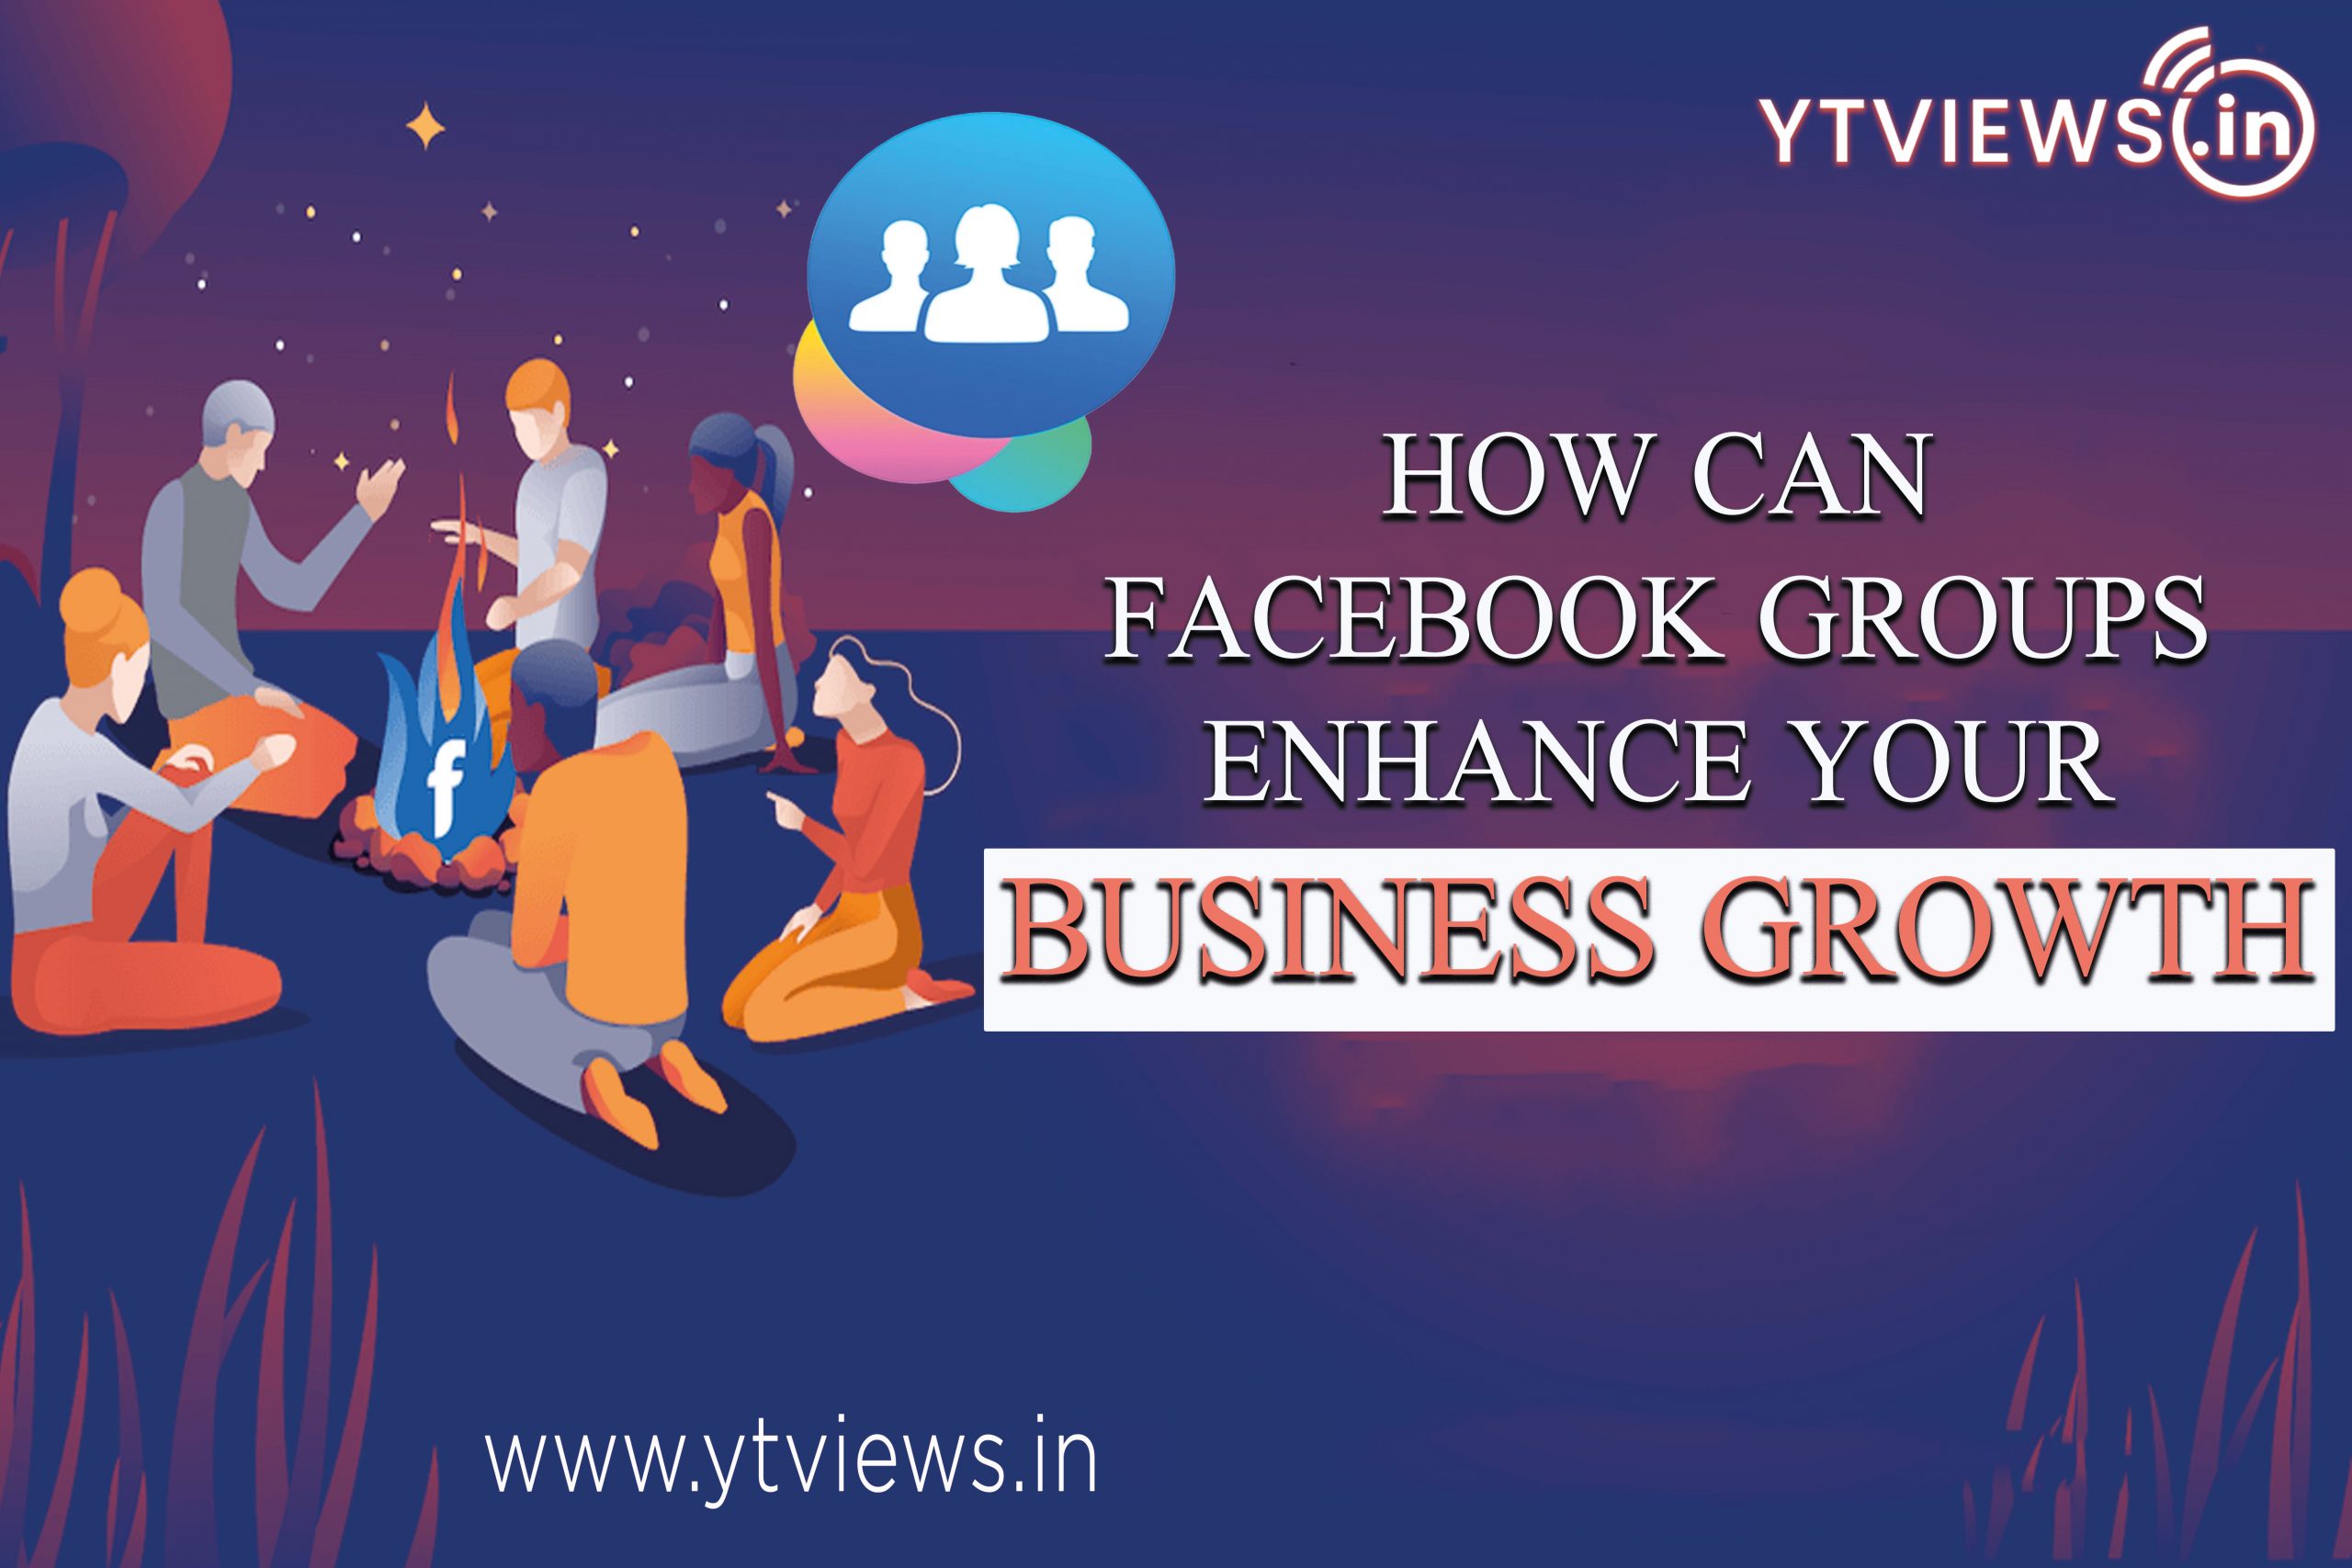 How can Facebook groups enhance your business growth?